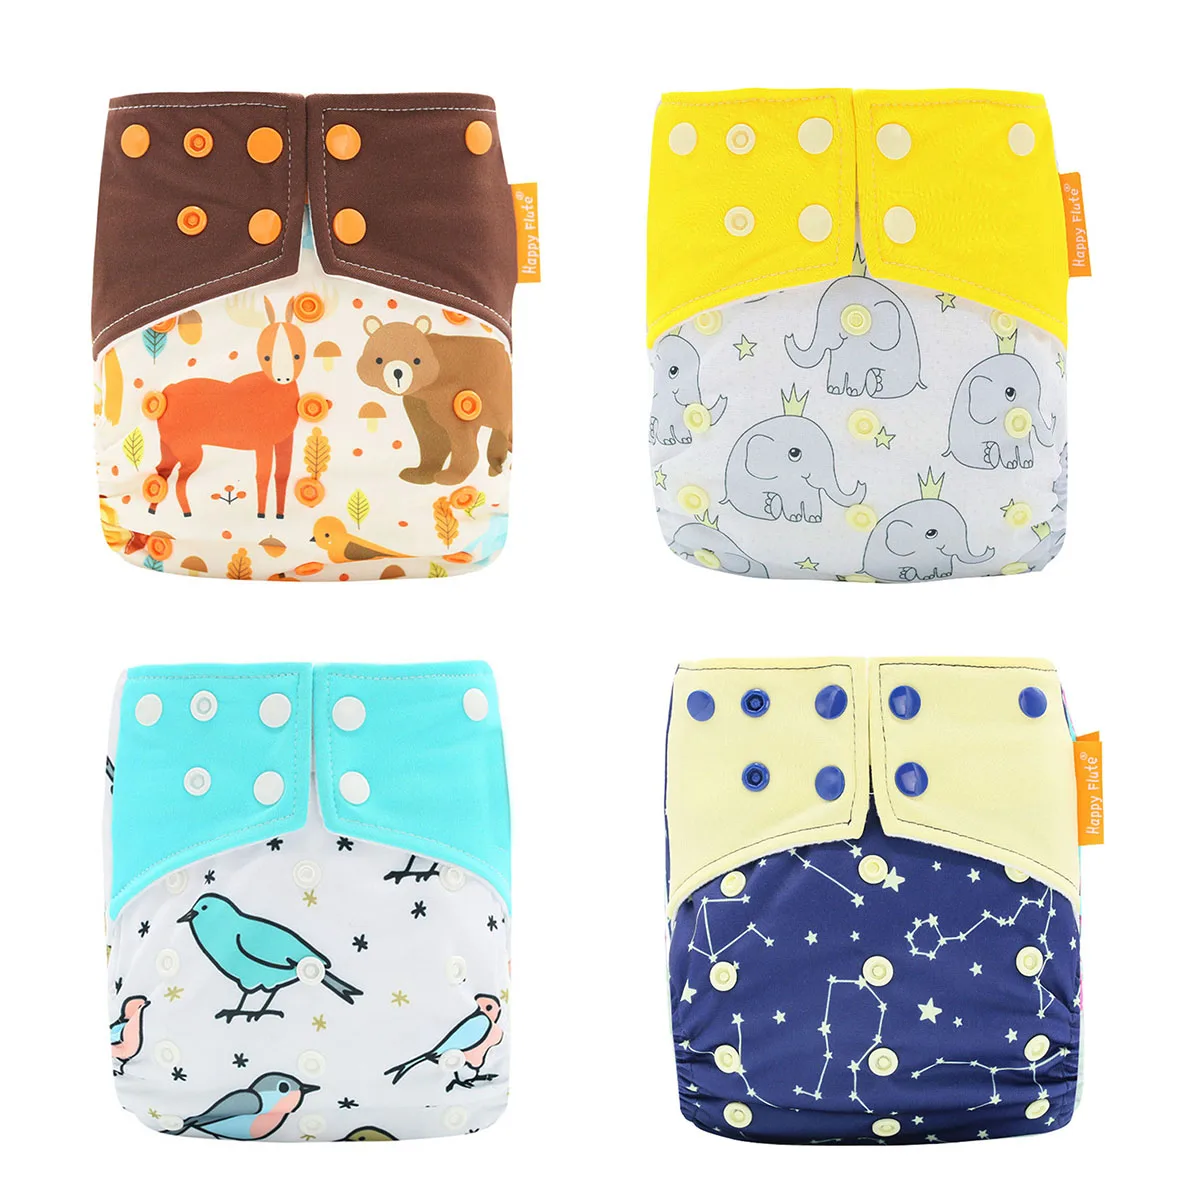 

Baby Washable Reusable Real Cloth STANDARD Hook-Loop Pocket Nappy Diaper Cover Wrap suits Birth to Potty One Size 0-2yrs